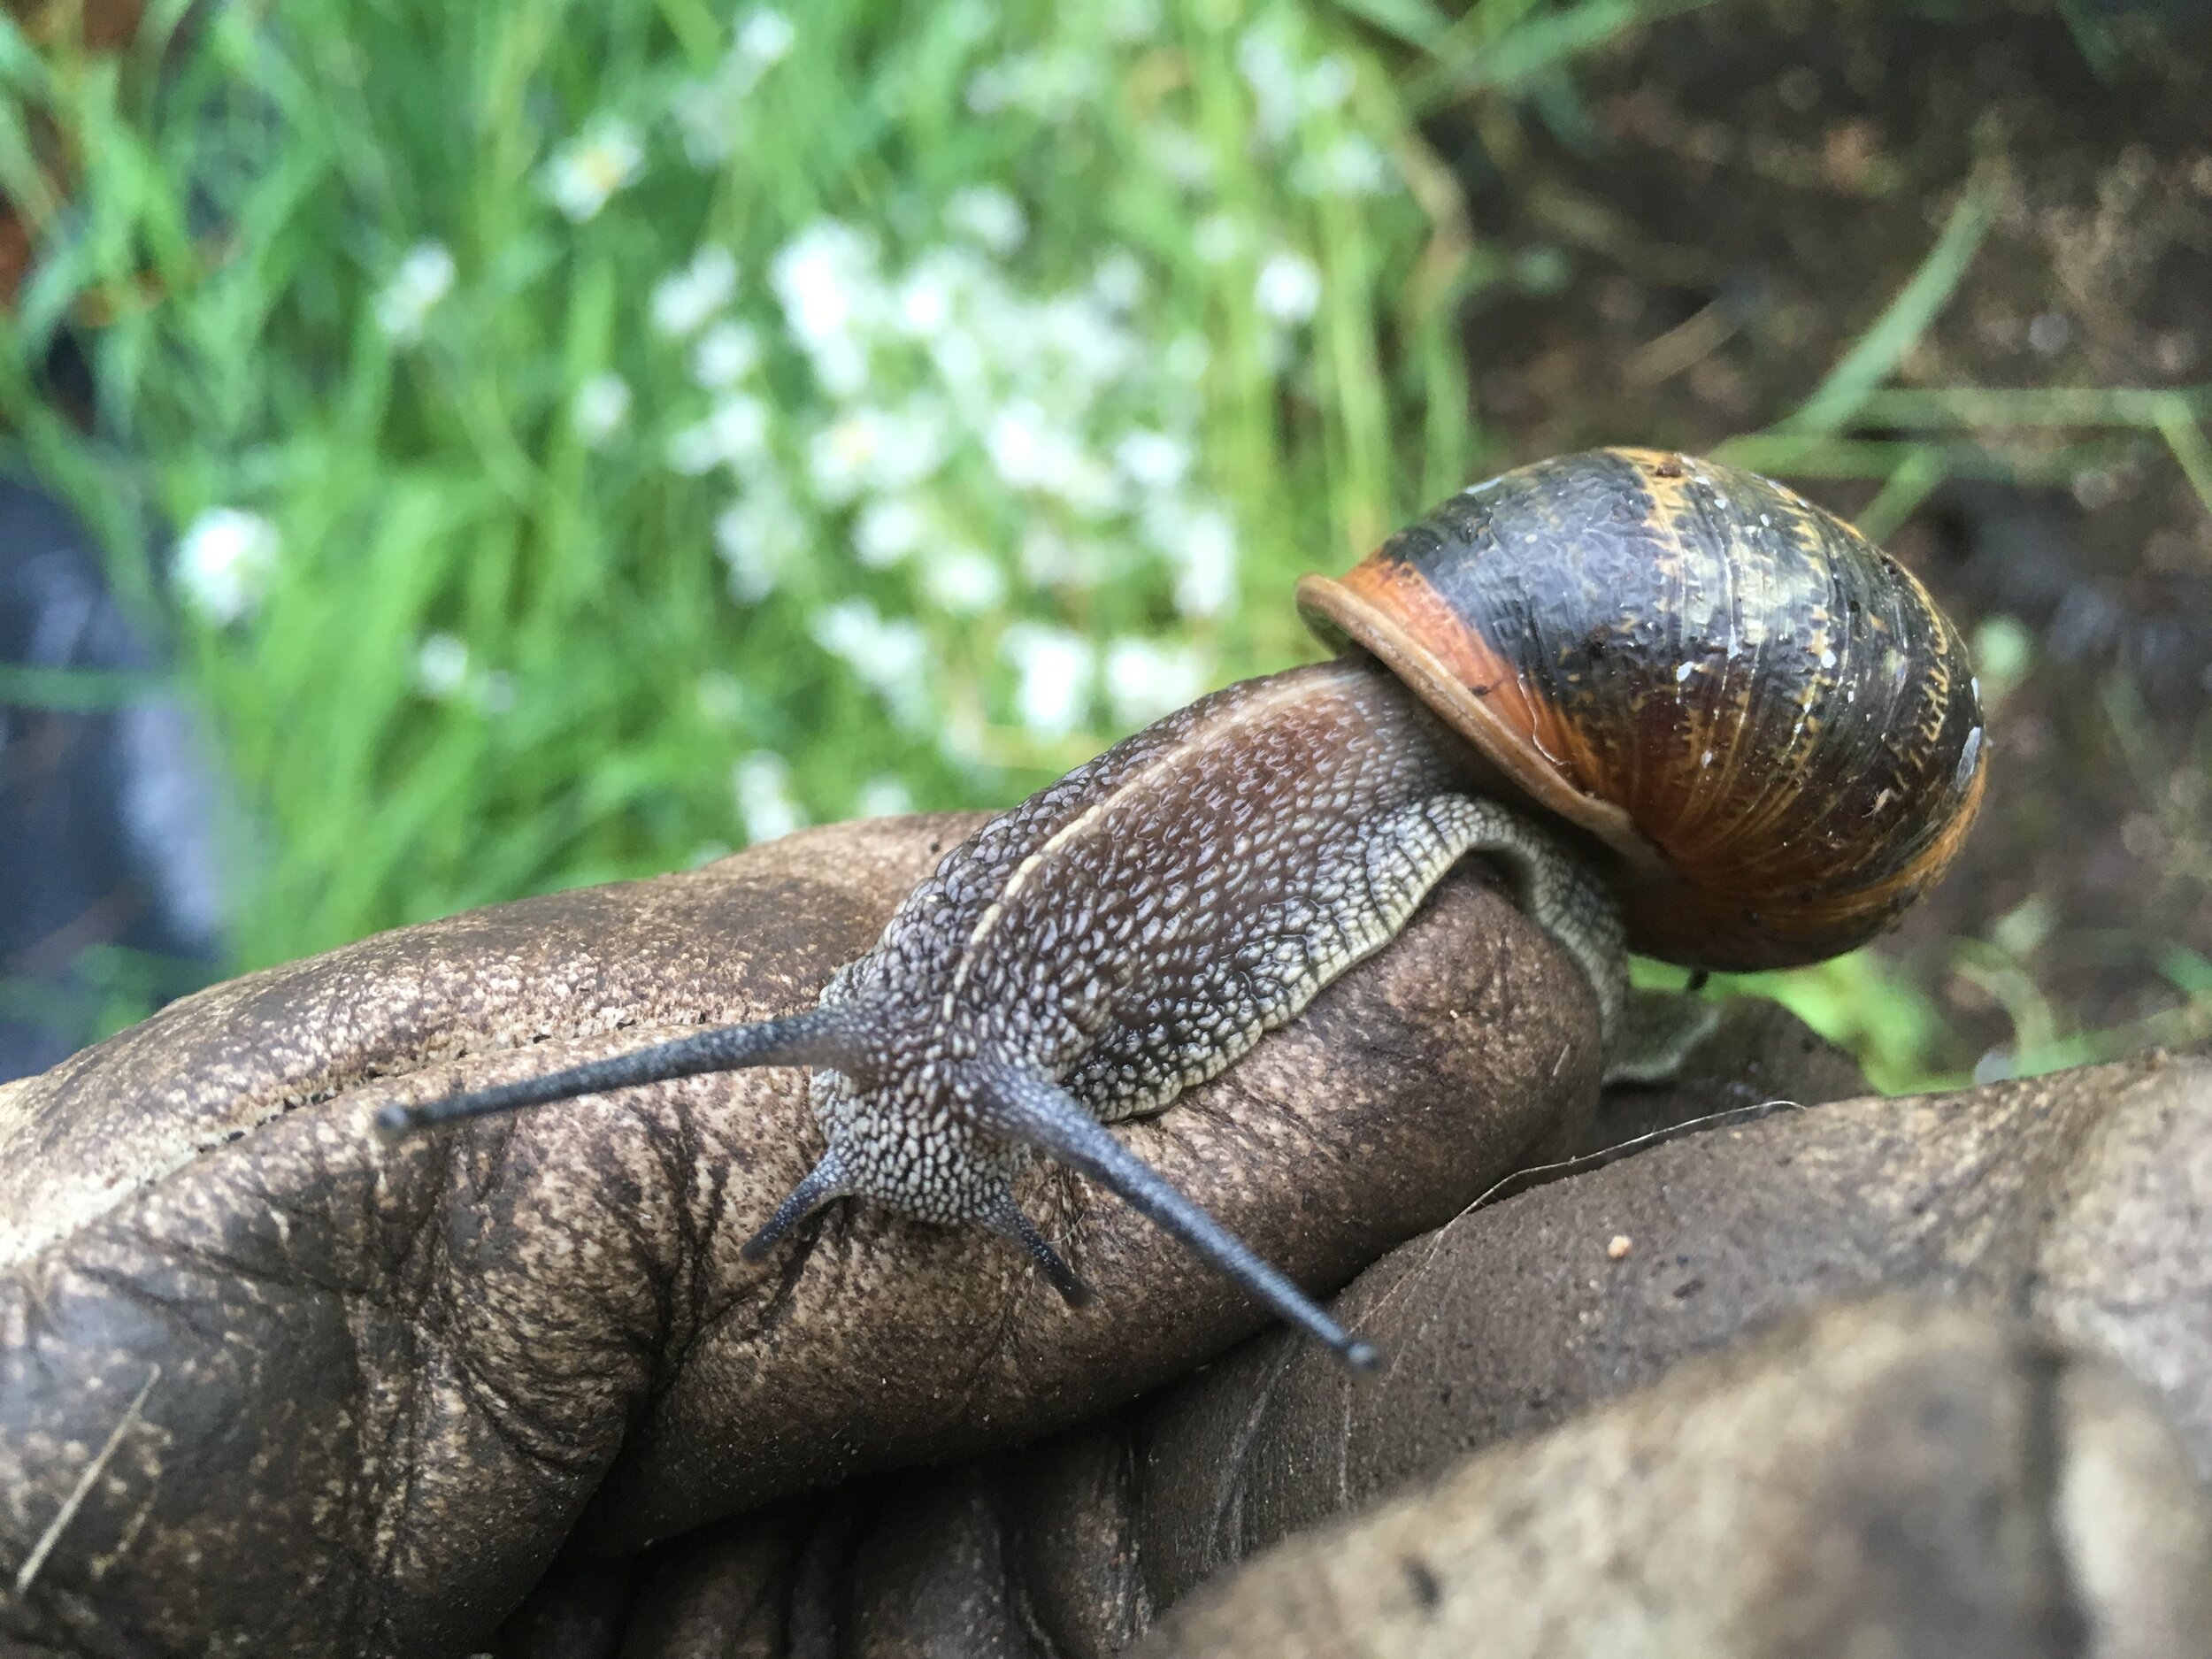 Fiona Campbell, Life in the Undergrowth, Snail on Hand.jpeg